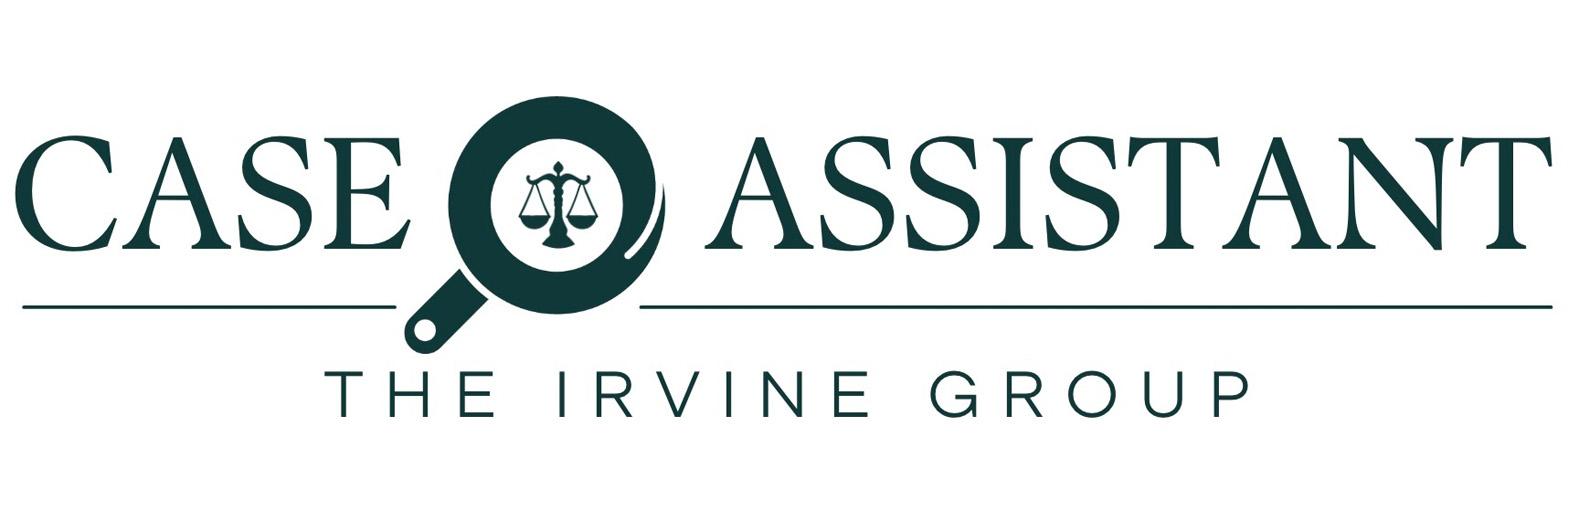 A logo that says "Case Assistant" with a magnifying glass between the word "Case" and the word "Assistant". Inside the magnifying glass viewing lens is a set of legal scales. Below the logo is the subtitle, "The IRVINE Group".